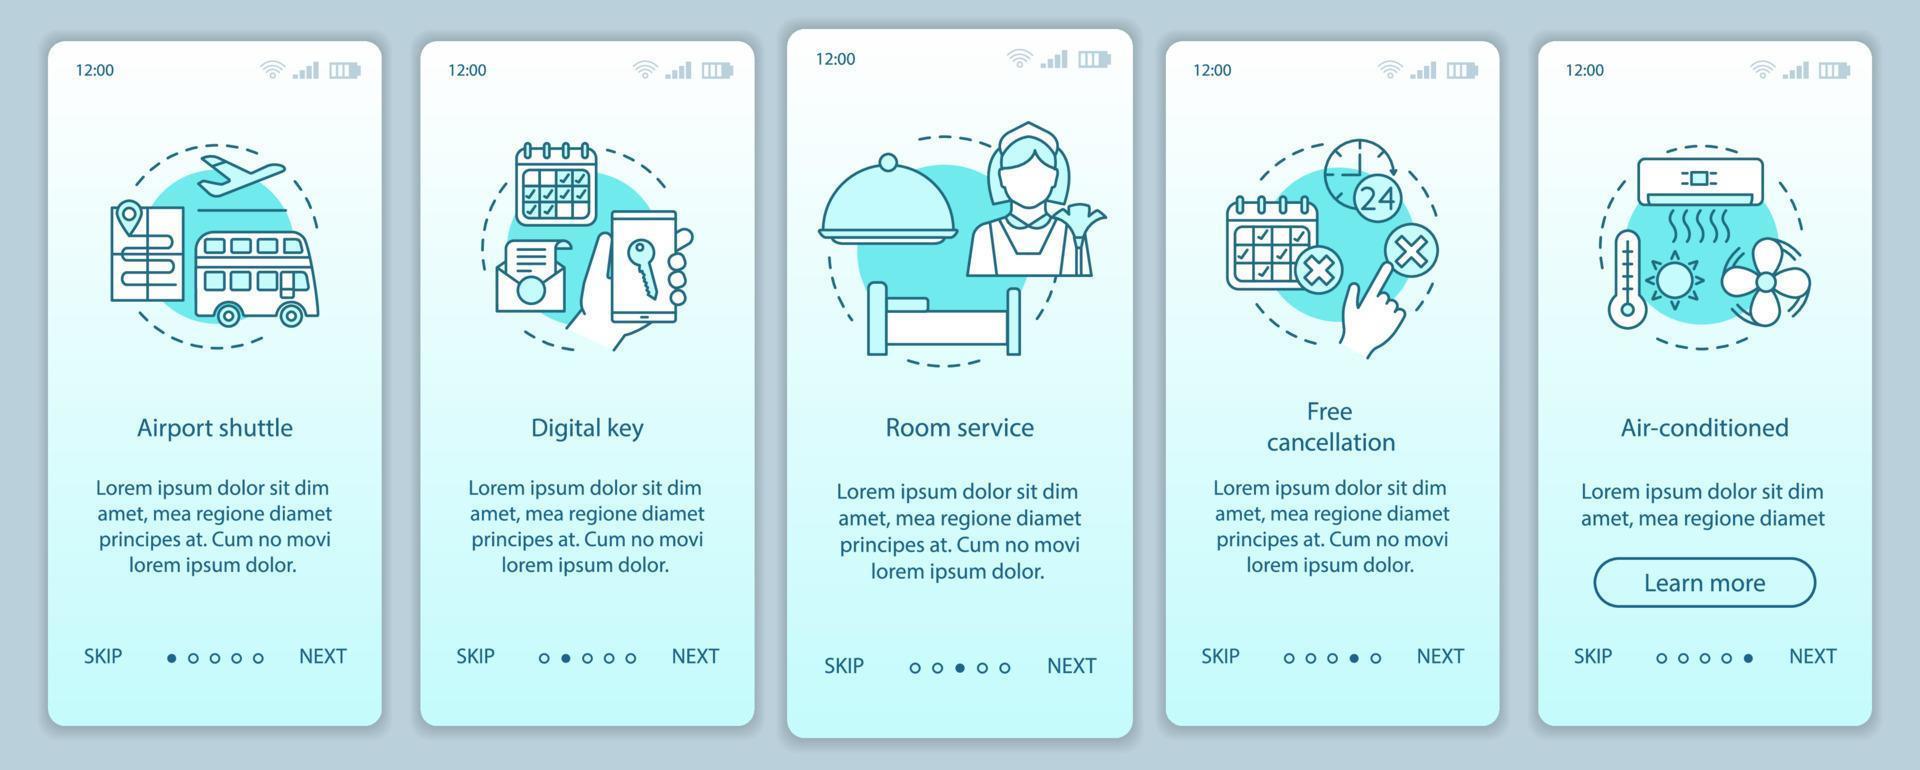 Hotel services onboarding mobile app page screen vector template. Airport shuttle, free cancellation. Walkthrough website steps with linear illustrations. UX, UI, GUI smartphone interface concept